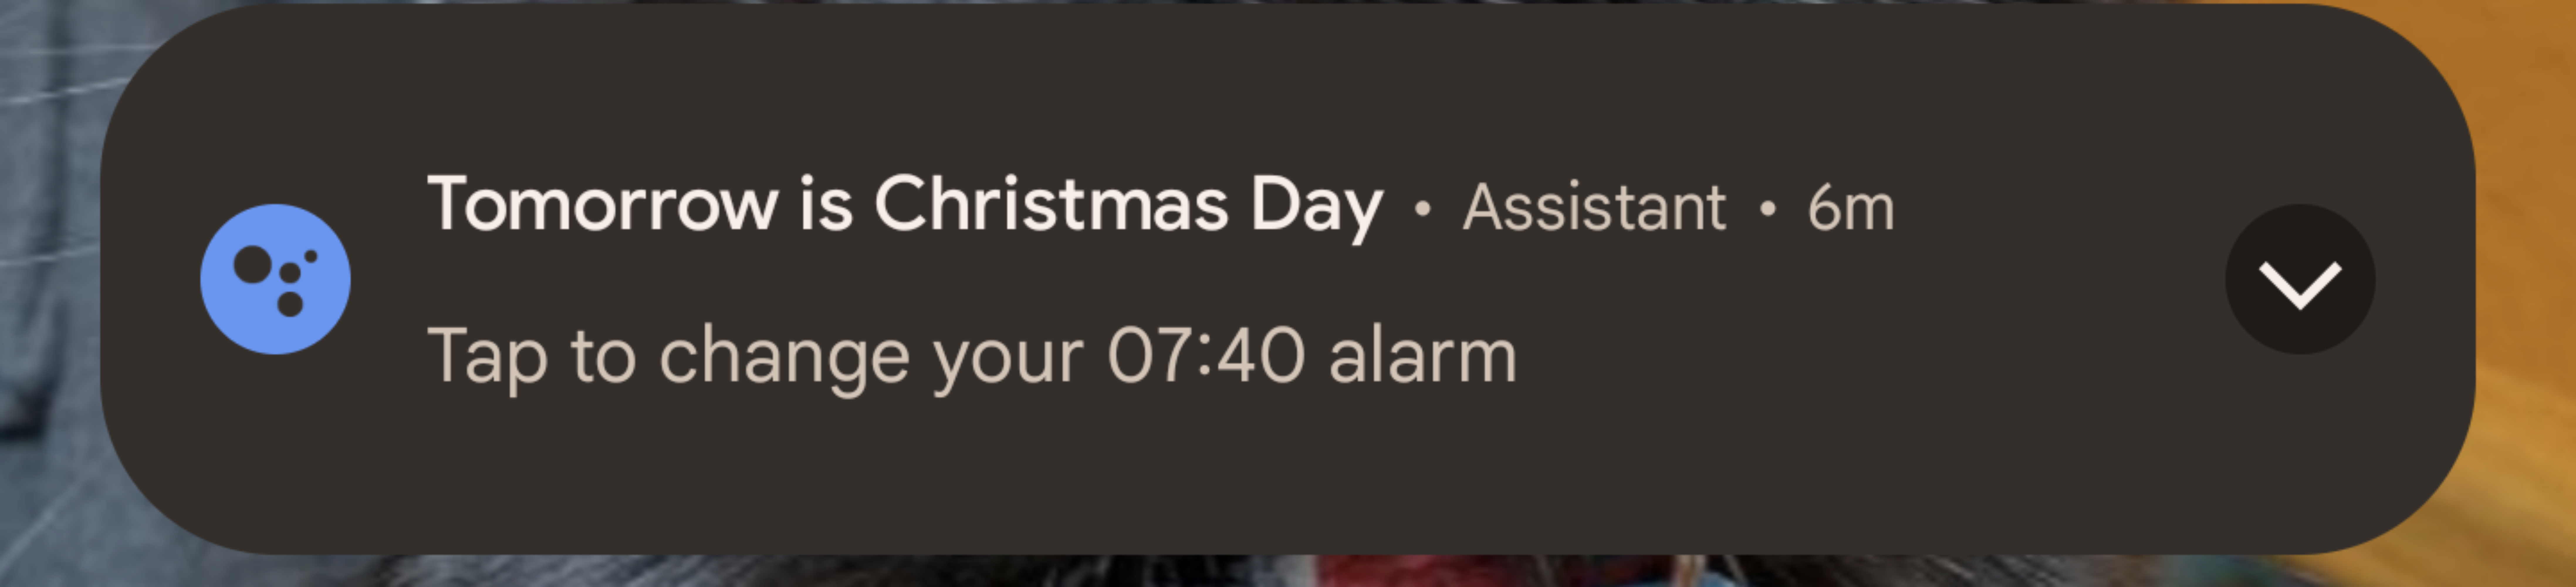 Screenshot of the Android lockscreen with a notification from Google Assistant showing "tomorrow is Christmas Day, change your alarm" despite the day today is the 26th of December, making tomorrow two days later